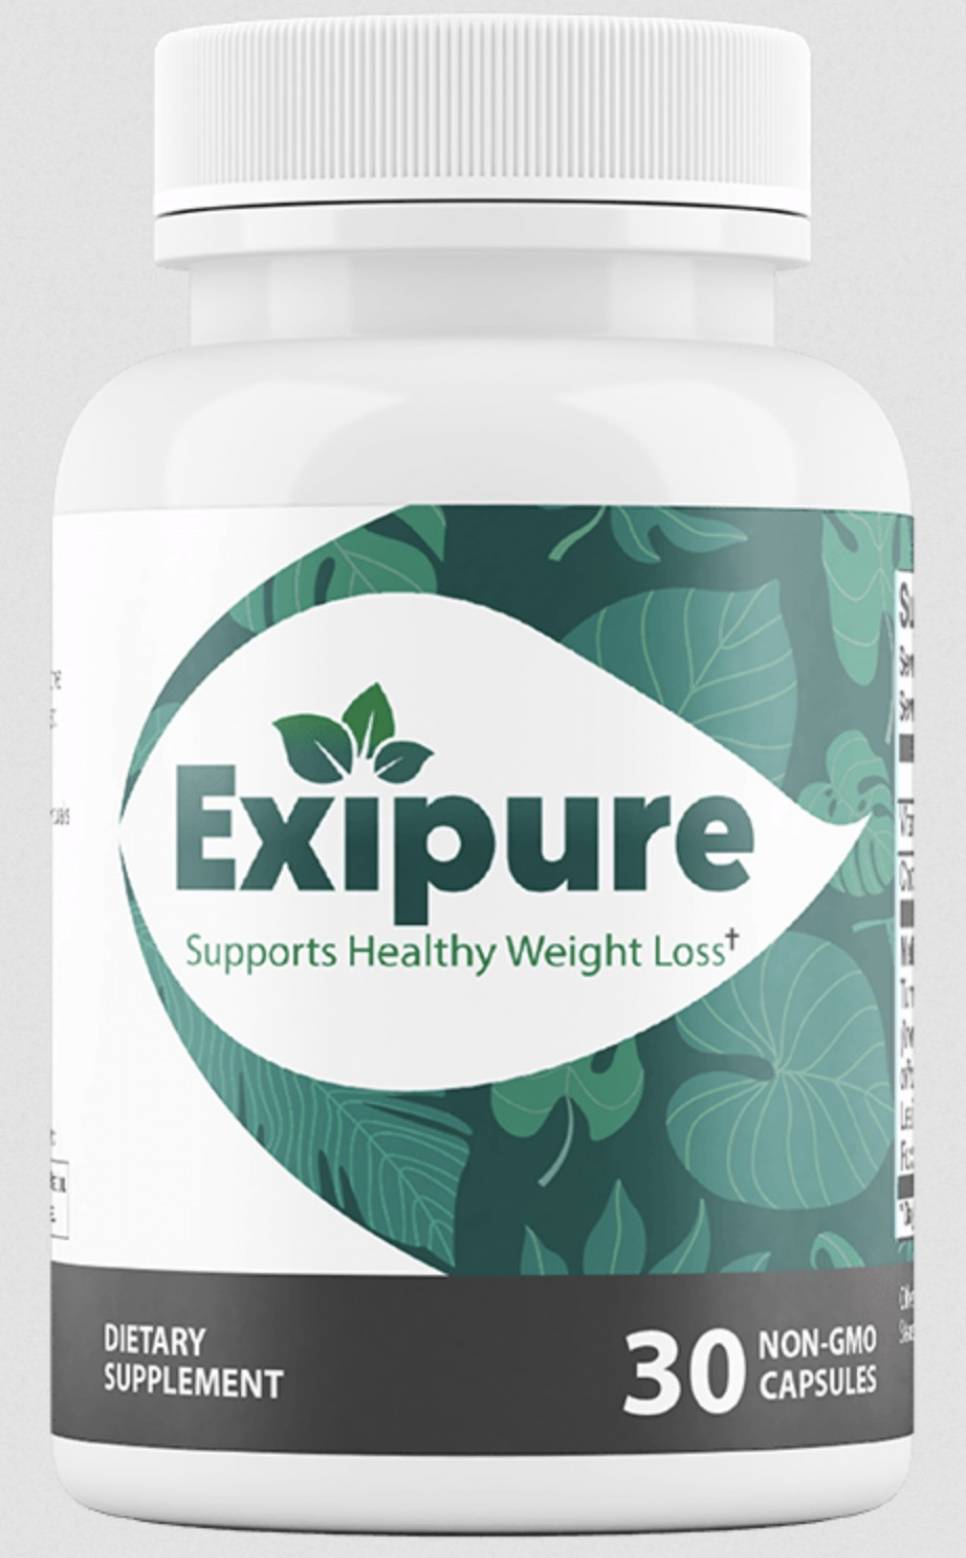 Reviews For Exipure Weight Loss